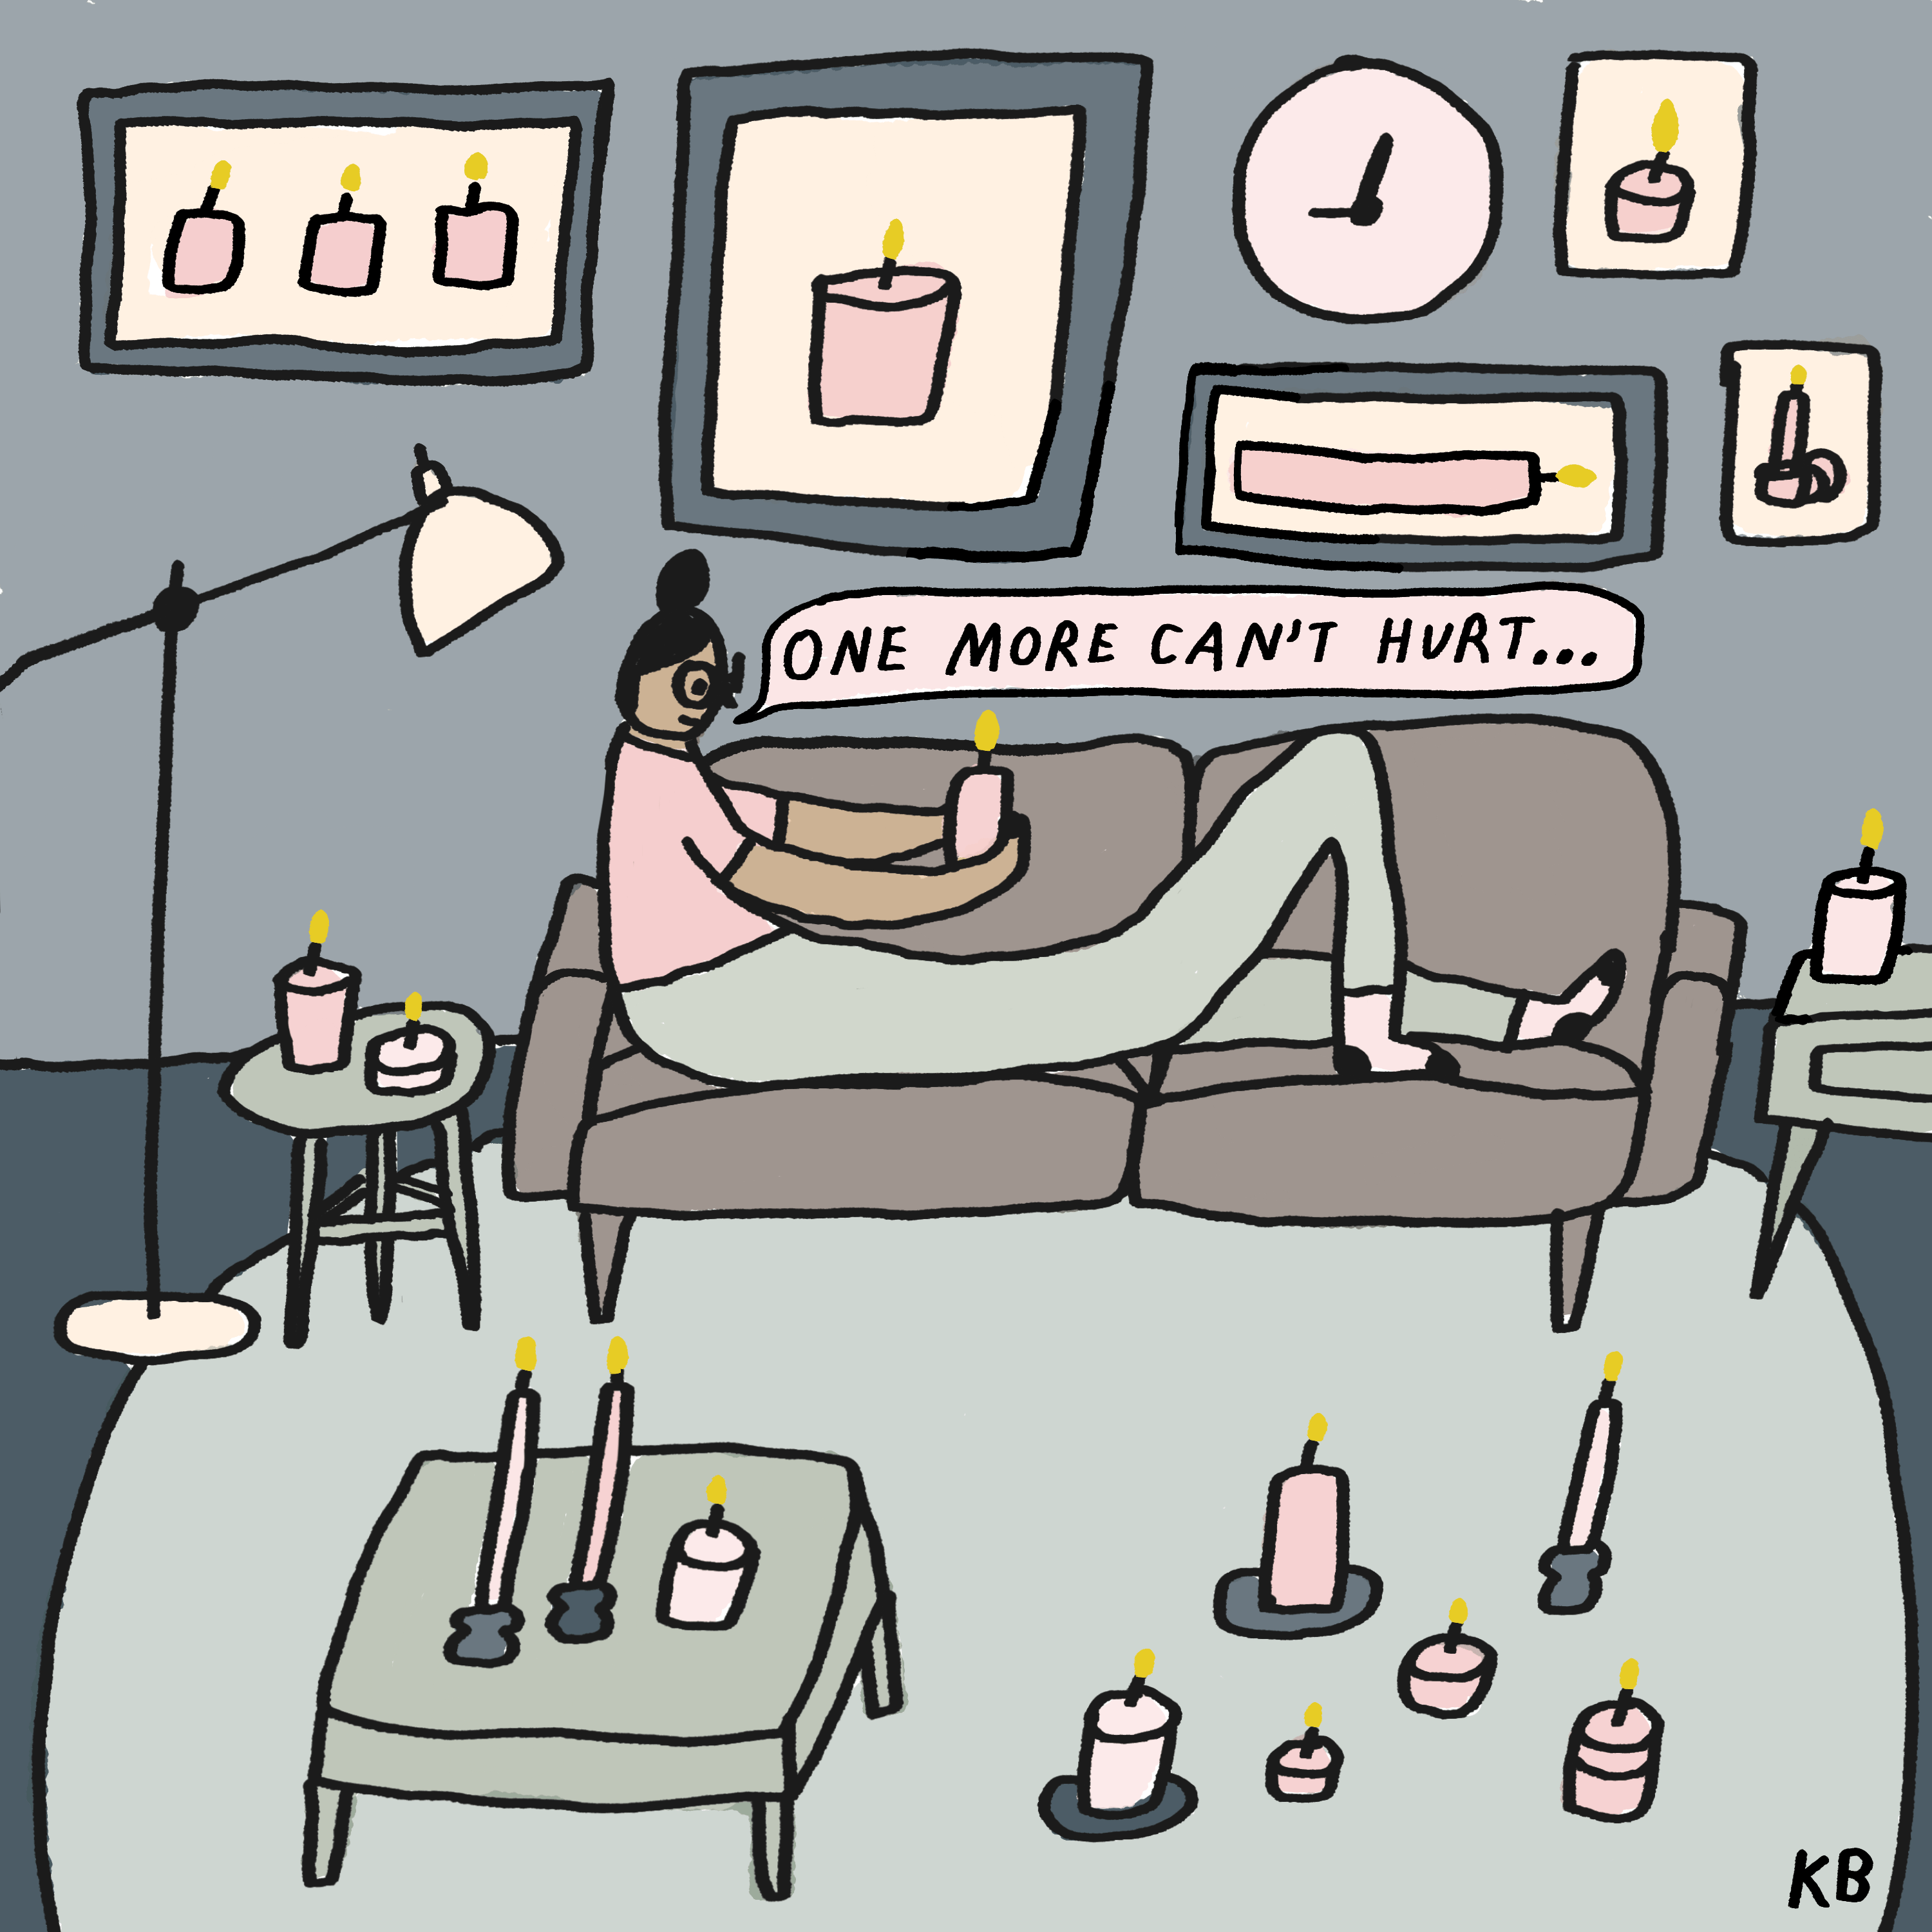 an illustration of being surrounded by candles and thinking about getting another.